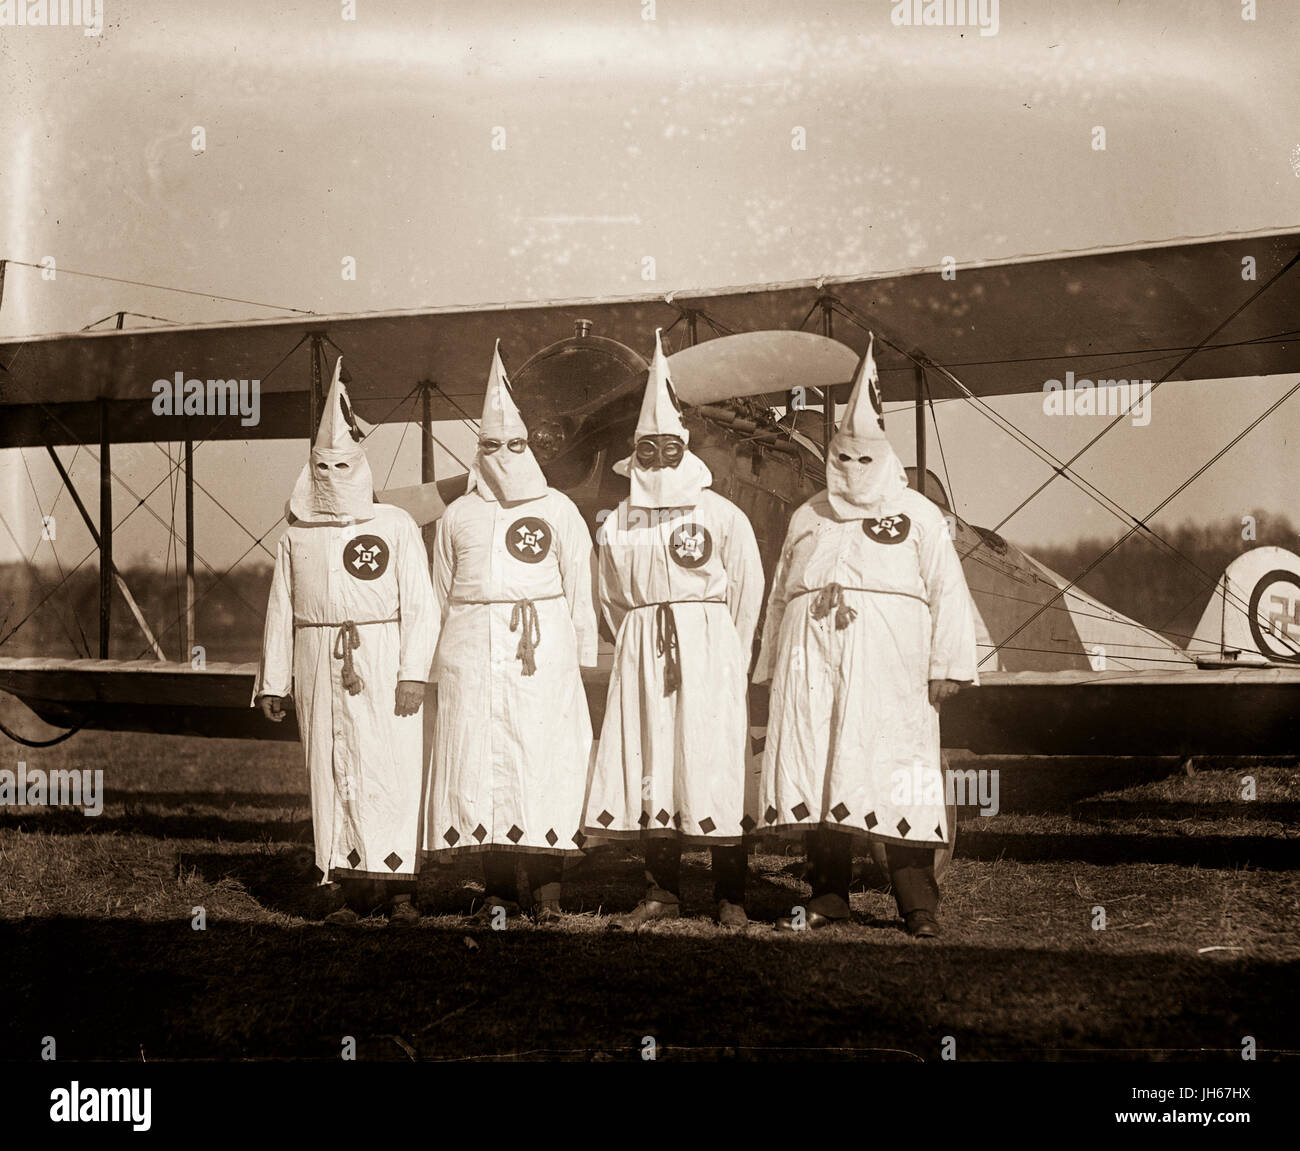 Ku Klux Klansmen use a biplane to drop and distribute KKK leaflets over the American countryside. Stock Photo